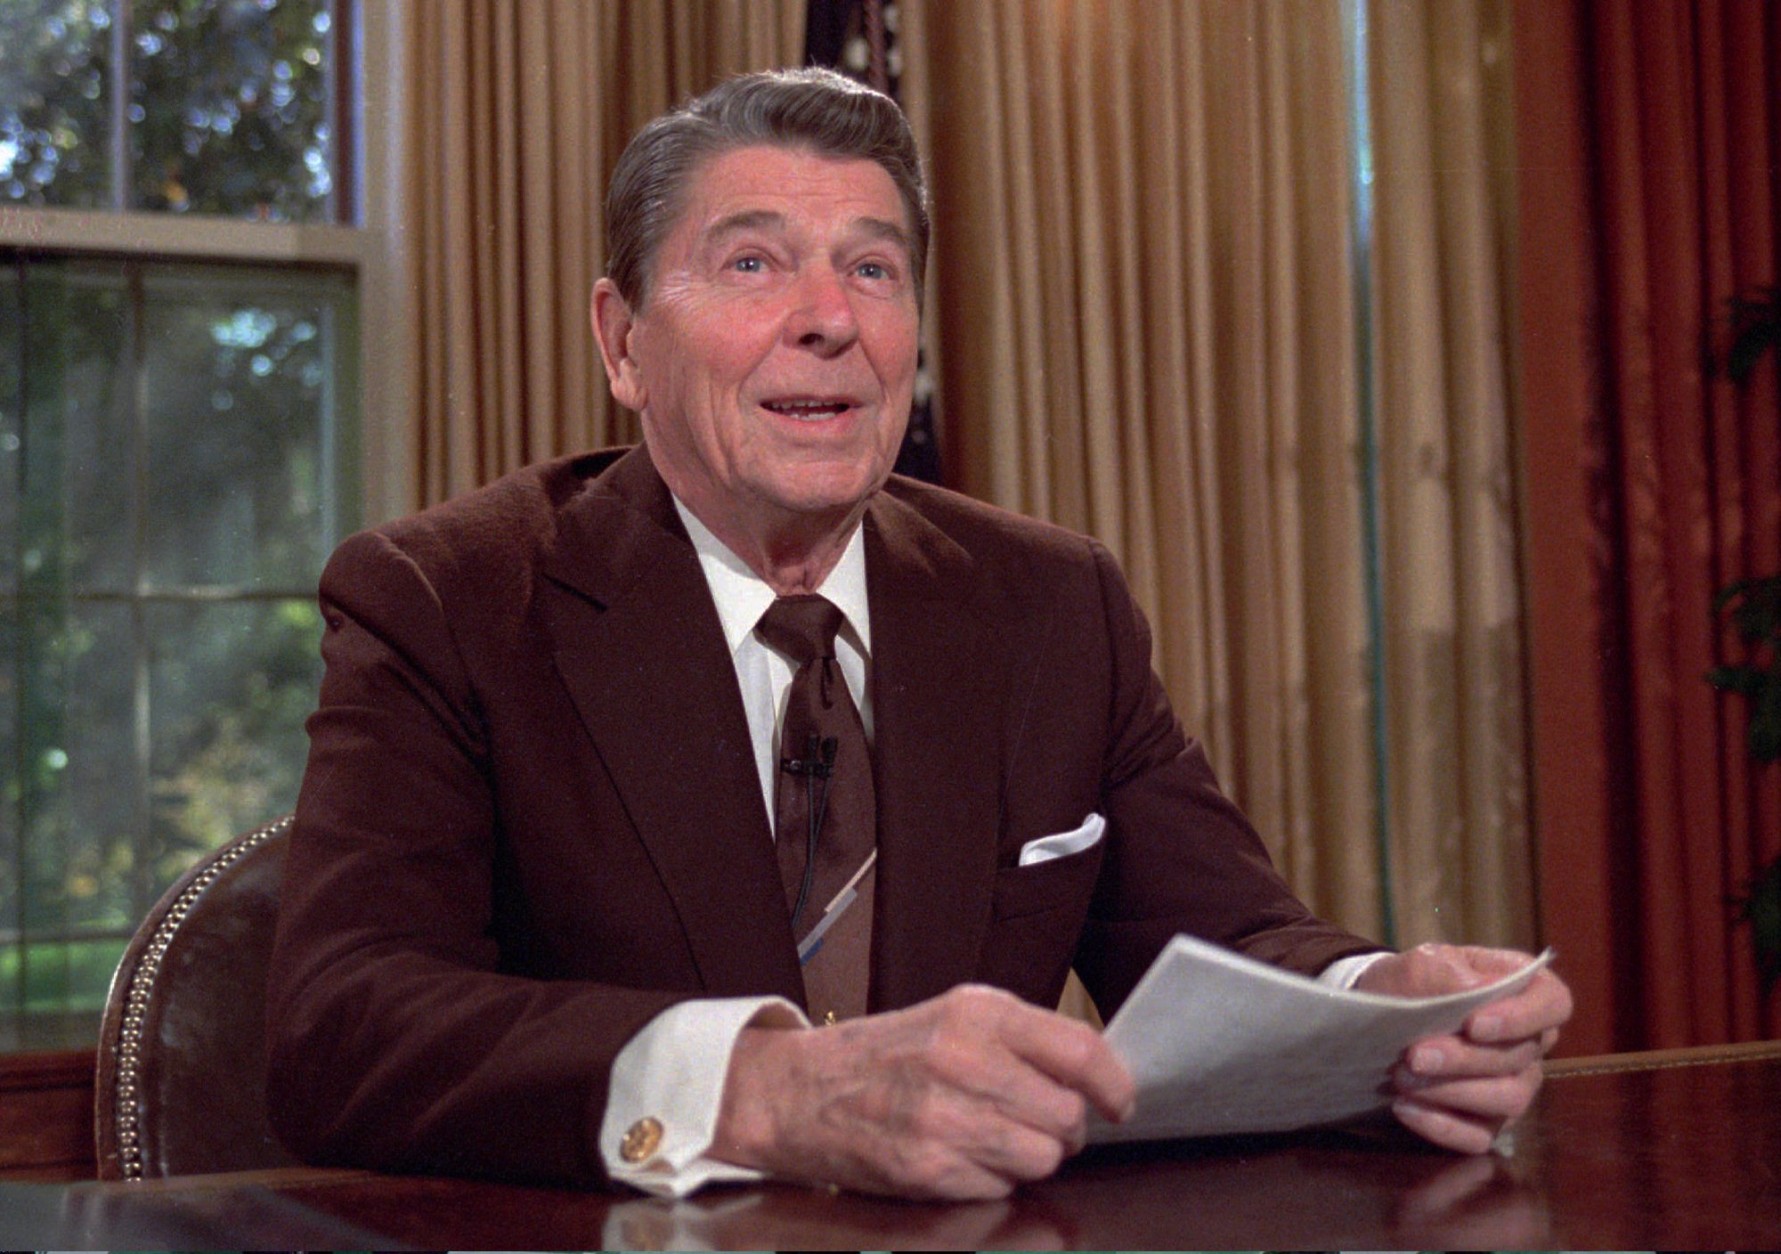 President Ronald Reagan works at his desk in the Oval Office of the White House as he prepares a speech on tax revision  in this May 24,1985 photo. It is reported that Reagan died on Saturday, June 5, 2004 at 93.  (AP Photo/Scott Stewart)